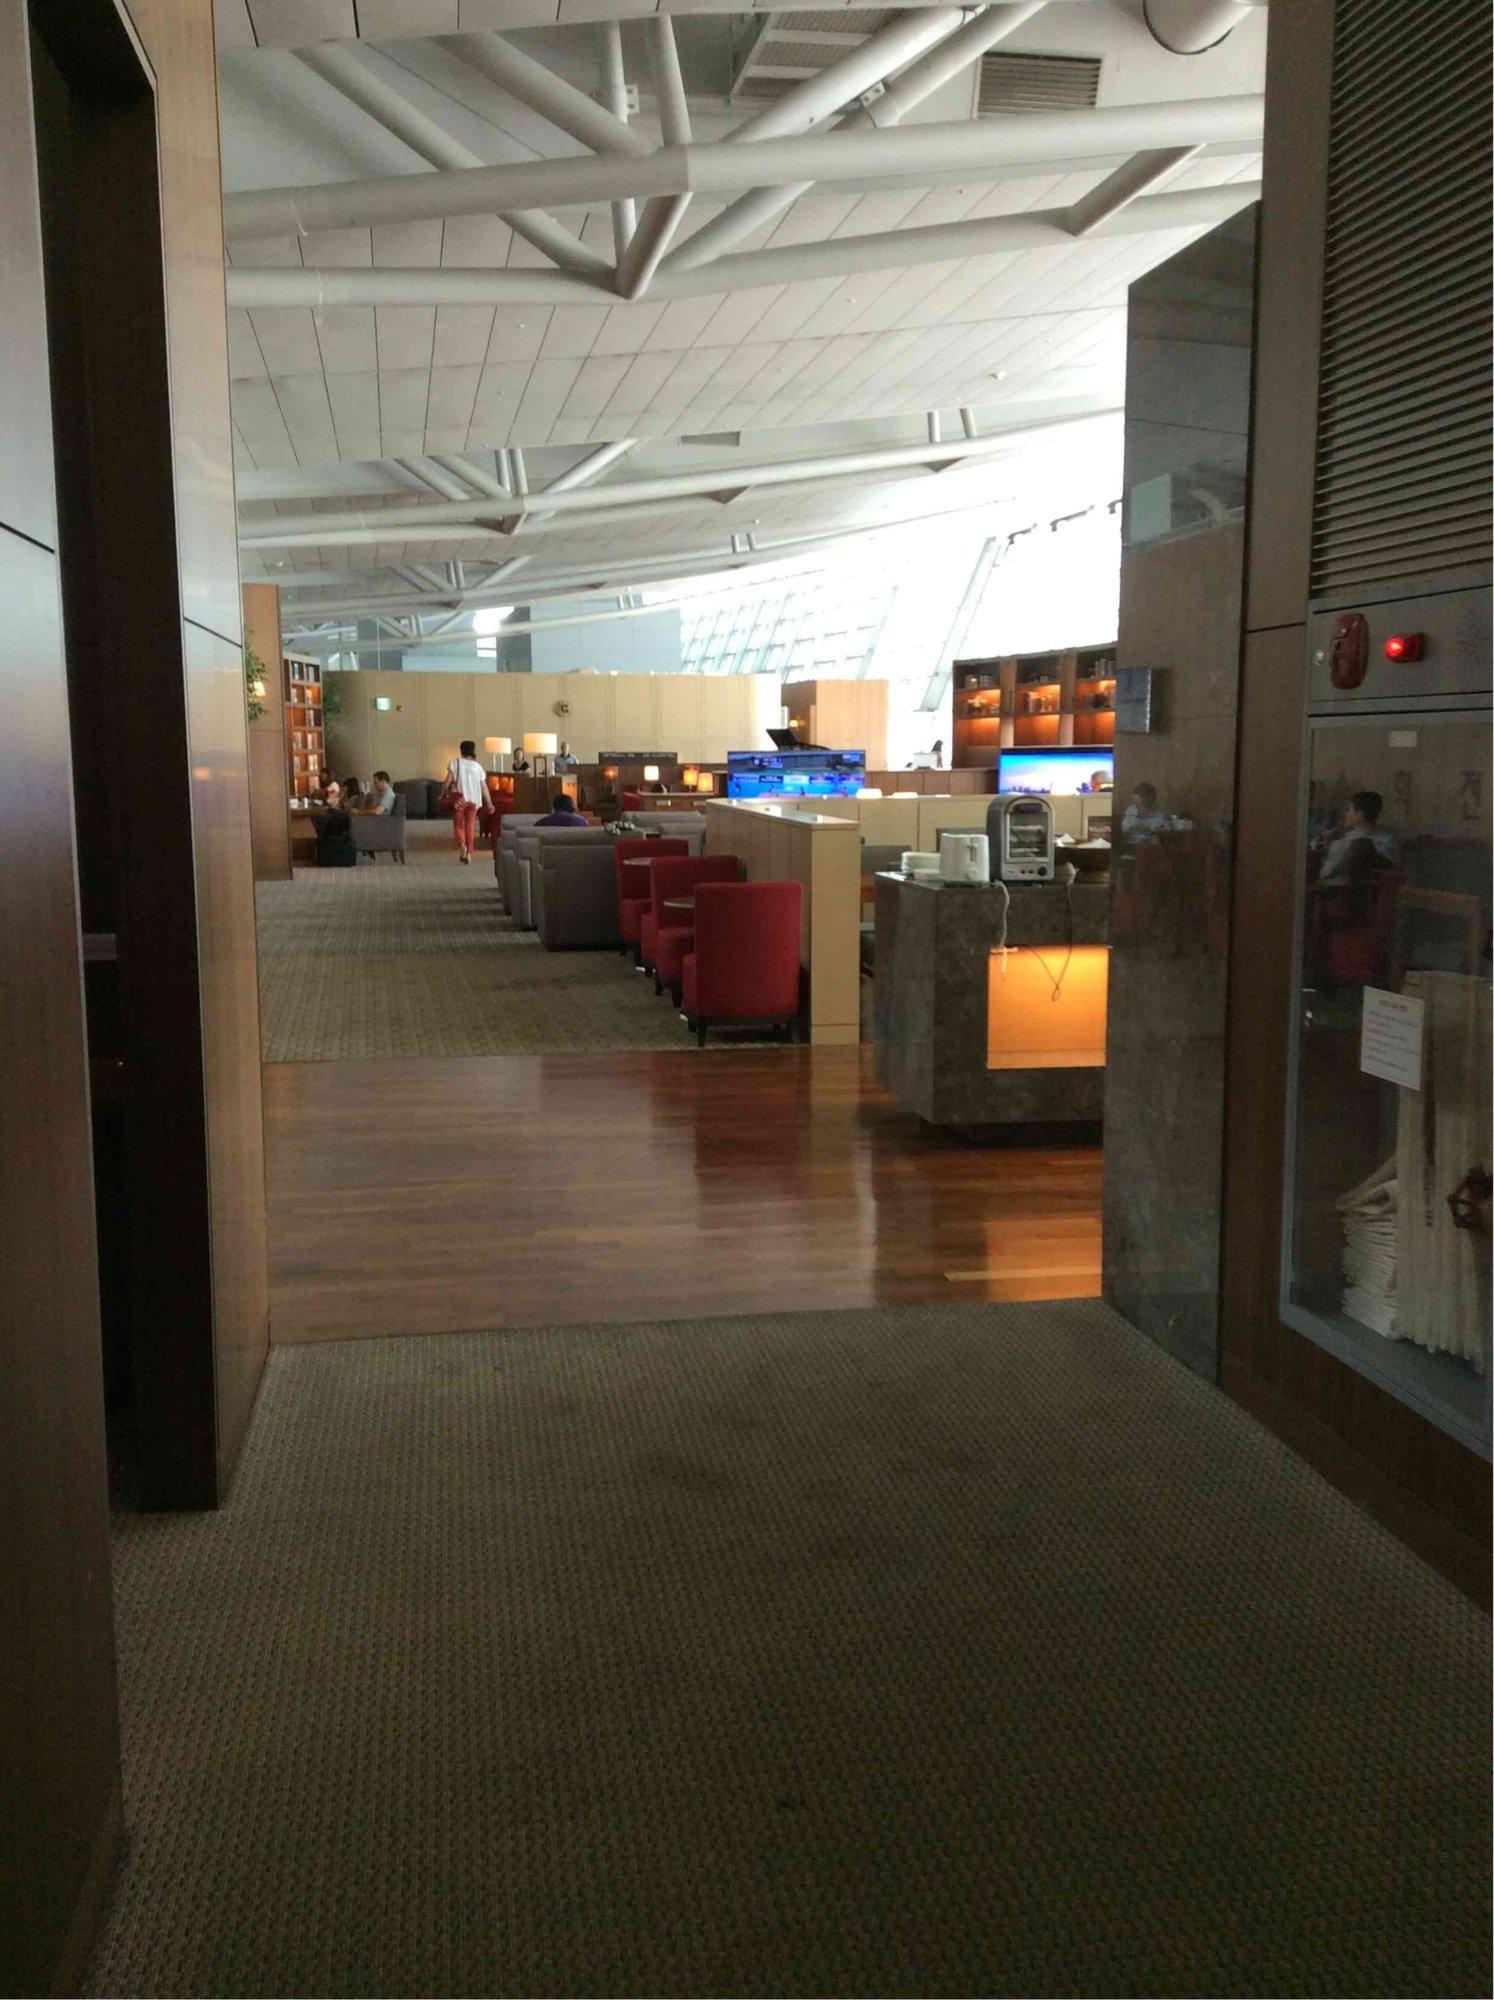 Asiana Airlines Business Class Lounge (East) image 45 of 59